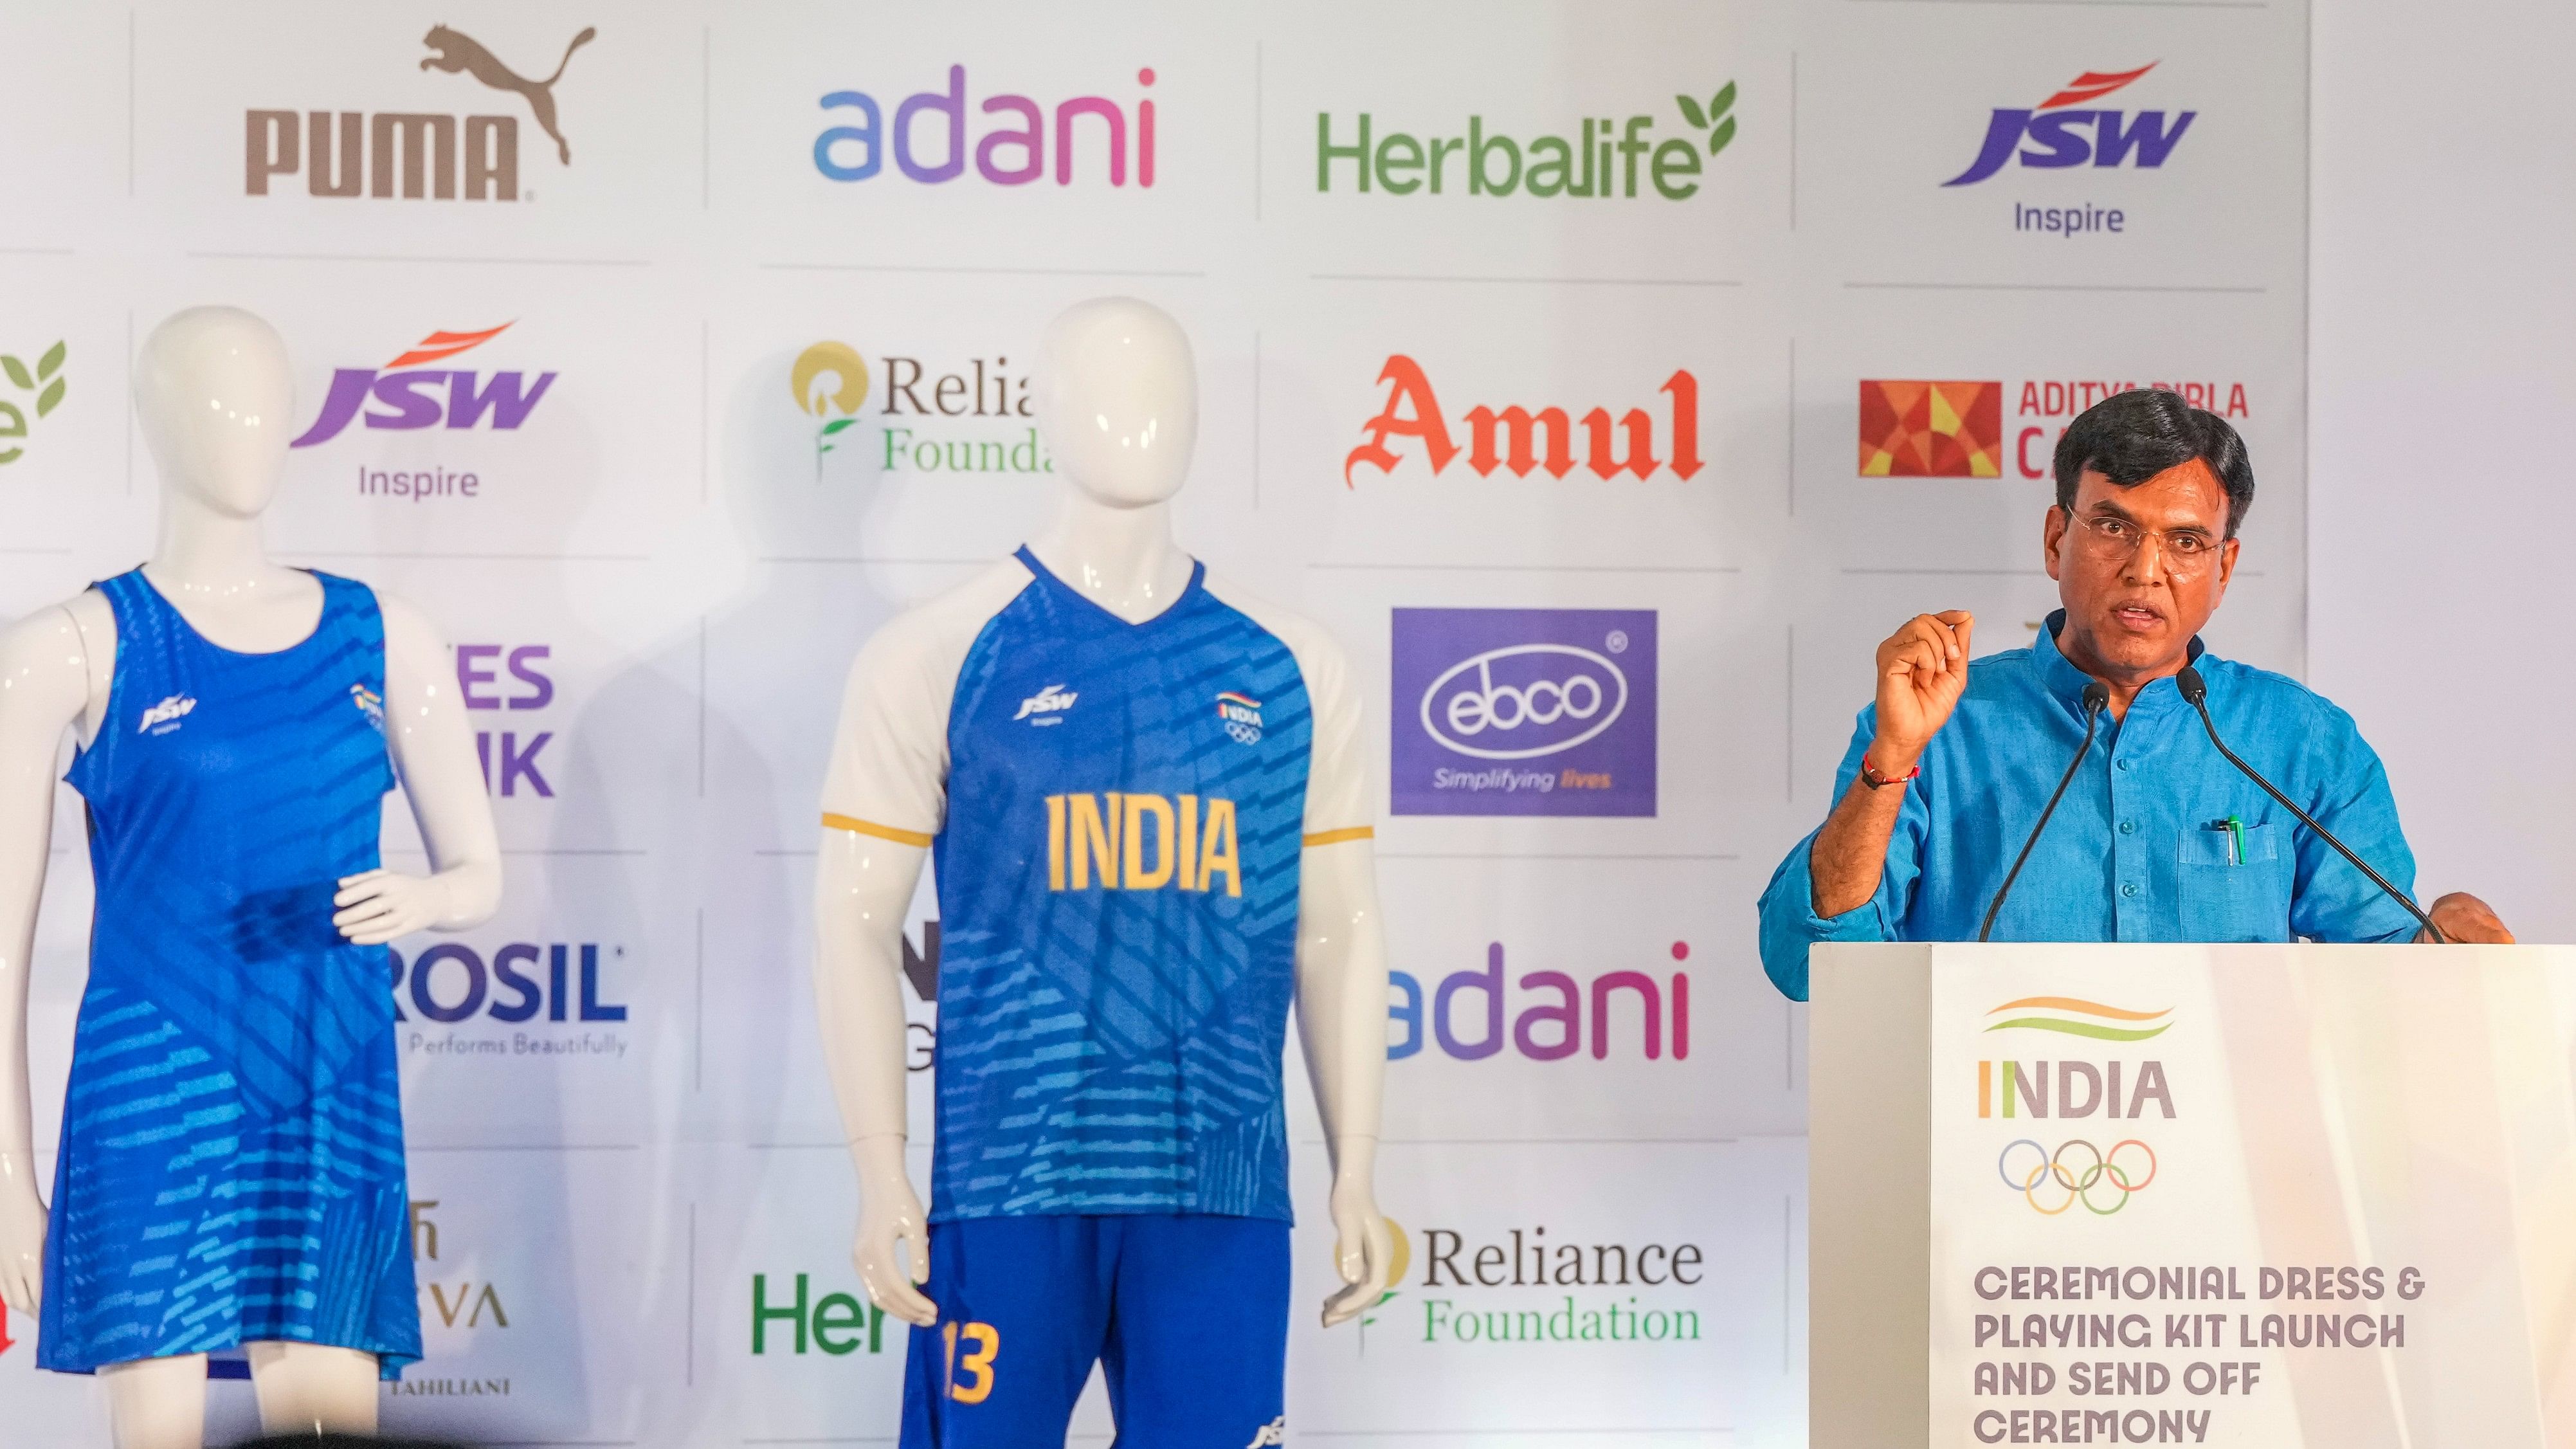 <div class="paragraphs"><p>Union Minister of Youth Affairs and Sports Mansukh Mandaviya speaks during the launch of the ceremonial dress and playing kit for the upcoming Paris Olympics, in New Delhi, Sunday.</p></div>